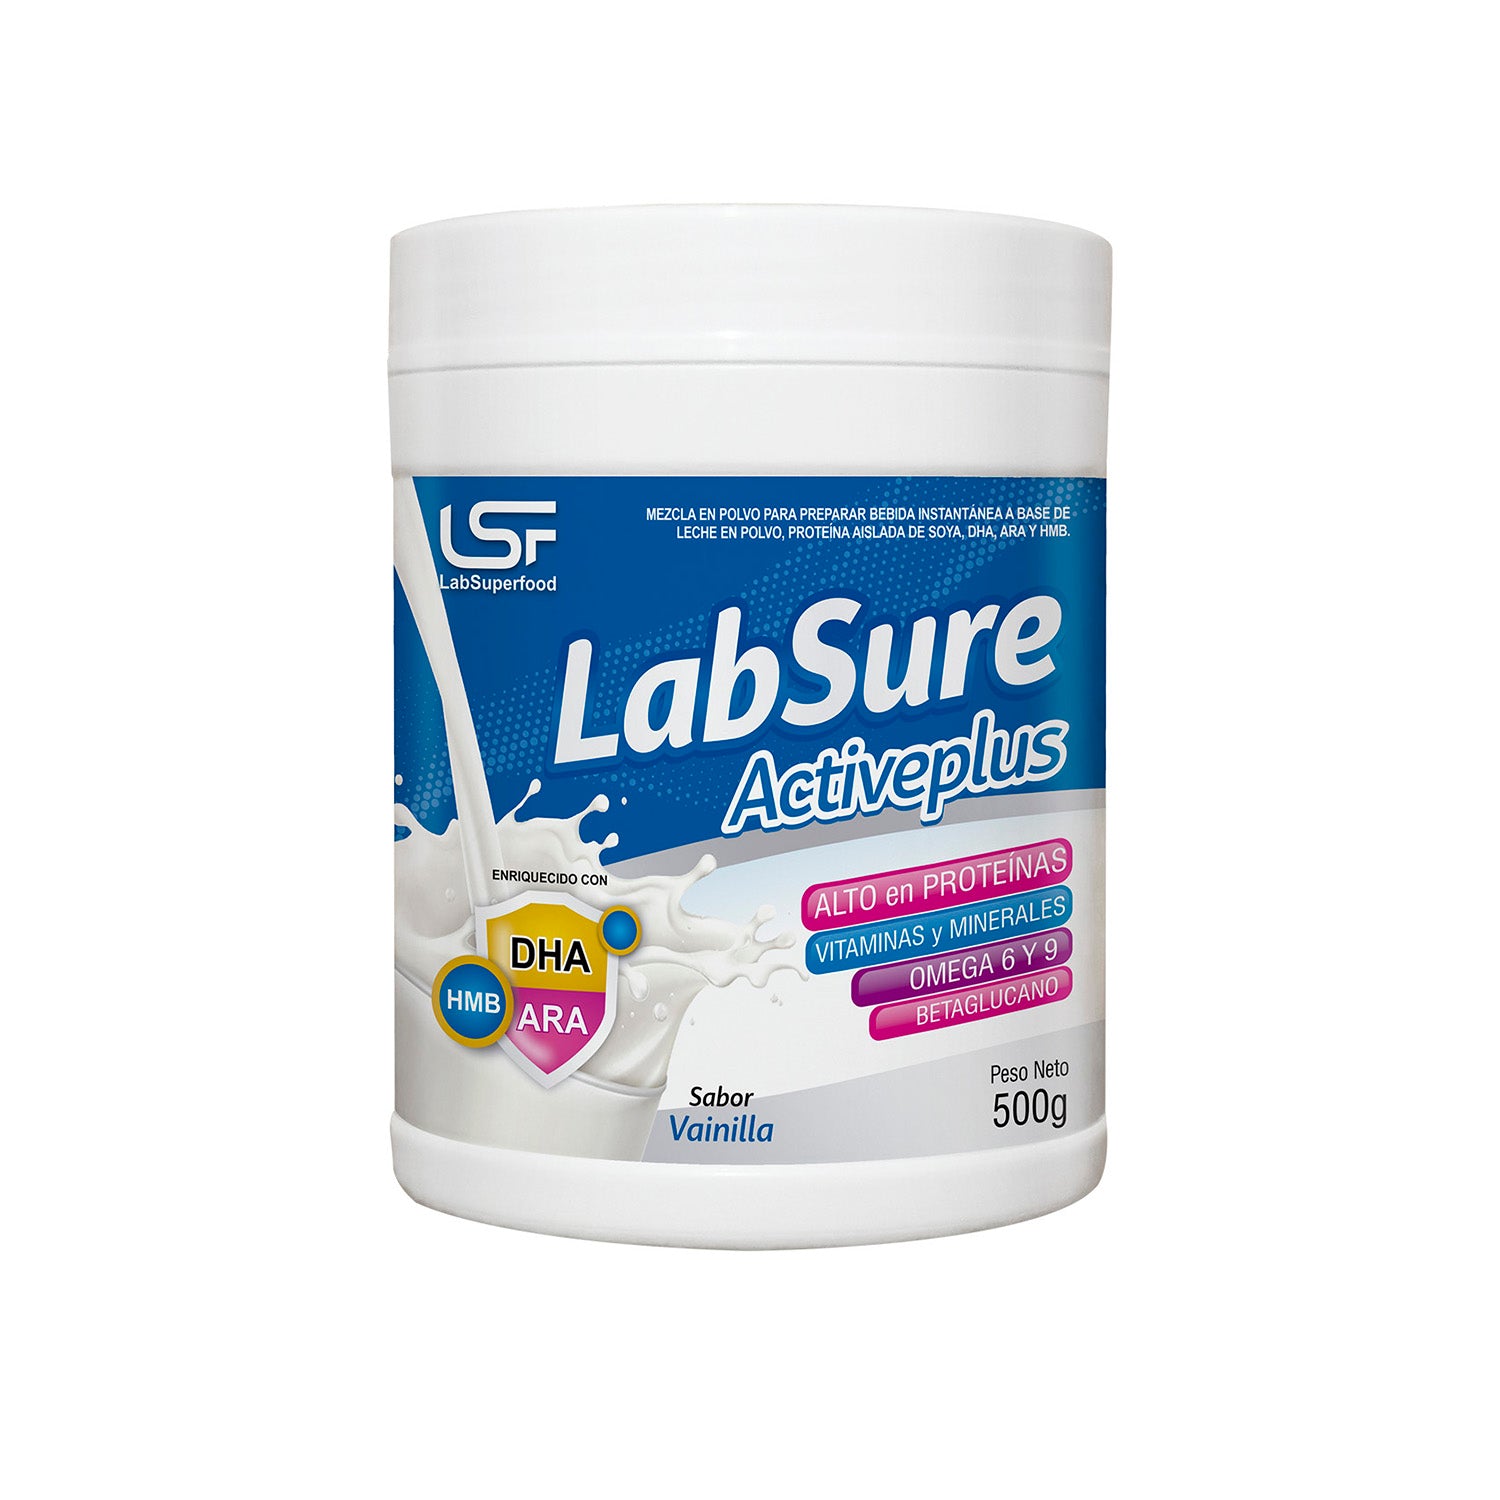 Labsure Activeplus - Pote - 500g